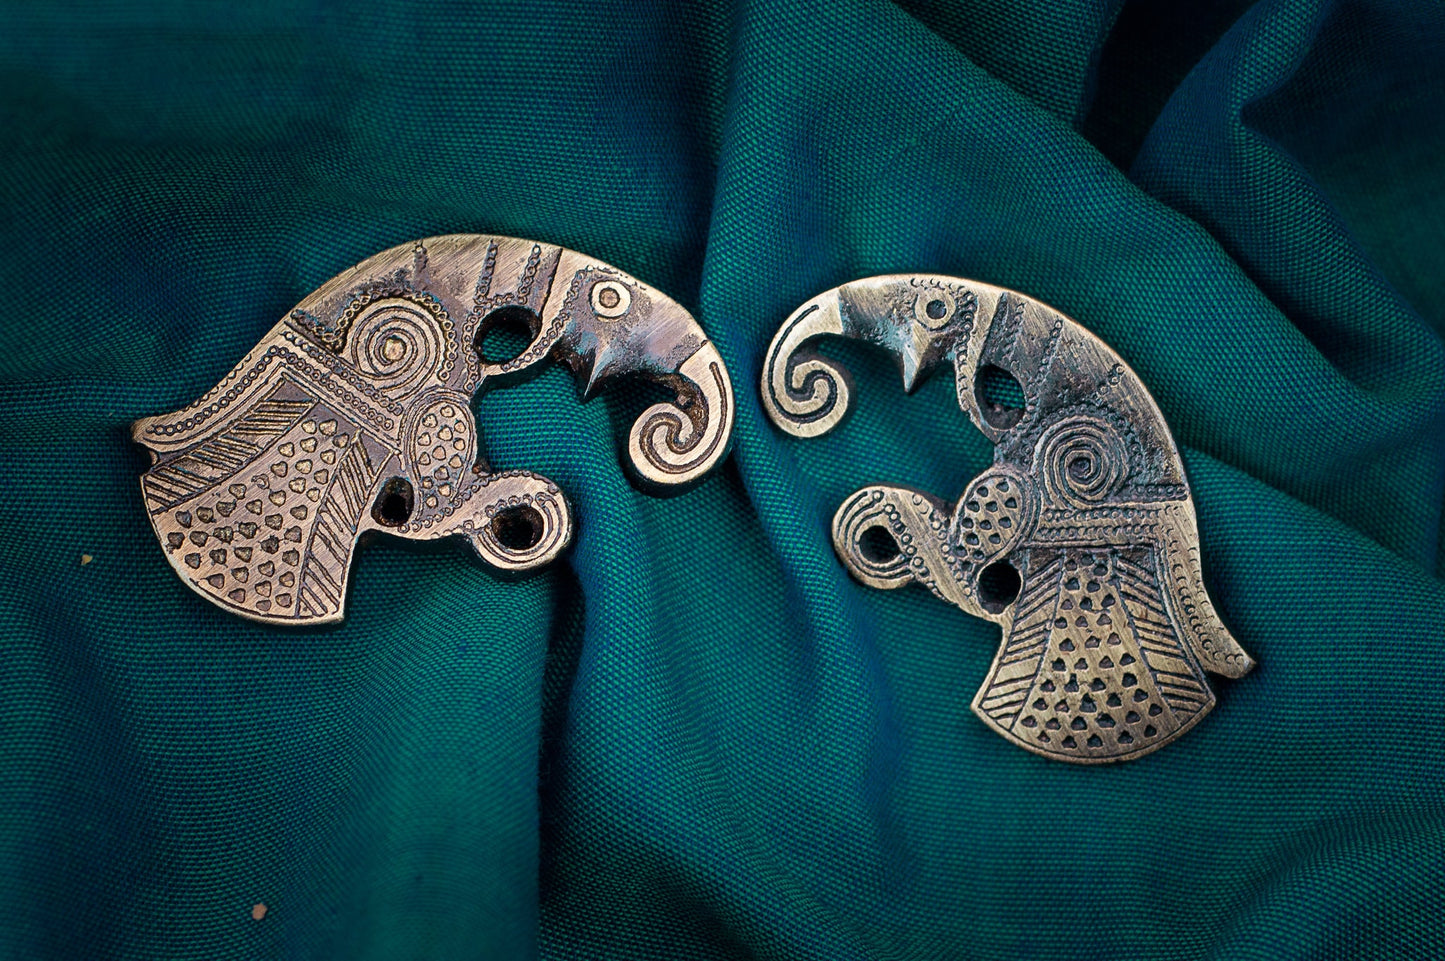 Pair of Frankish or Anglo-Saxon Eagles